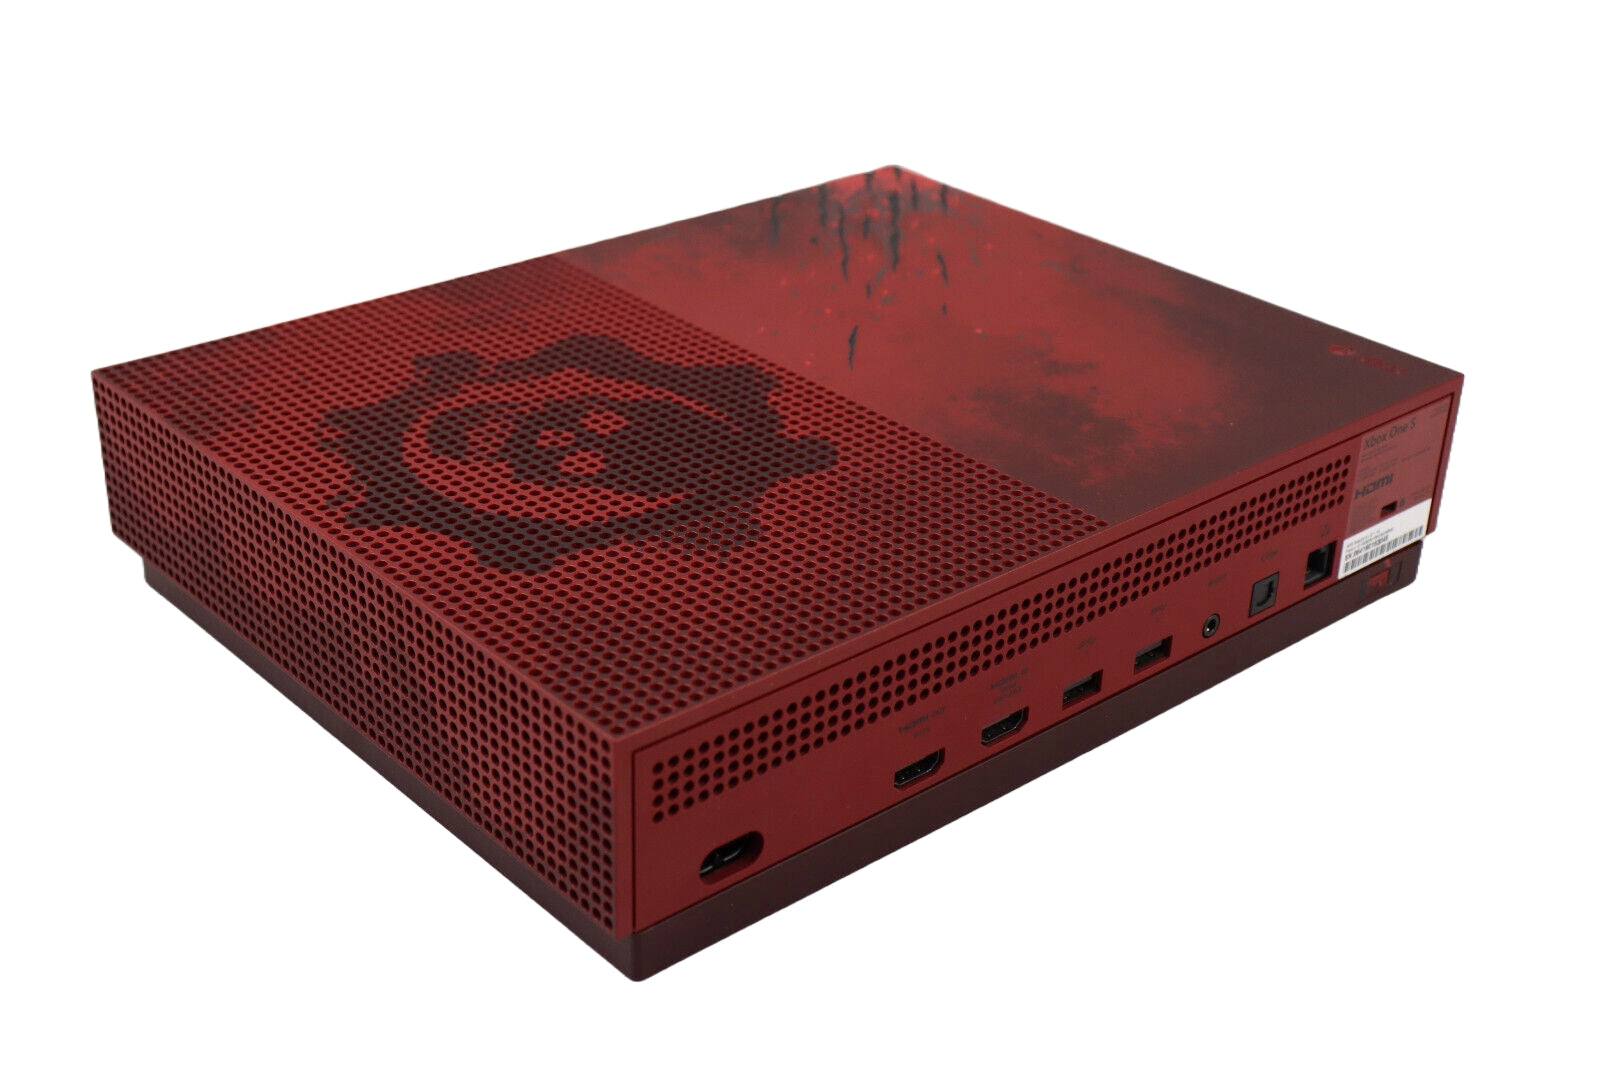 Xbox One Console - Gears of War 4 Limited Edition